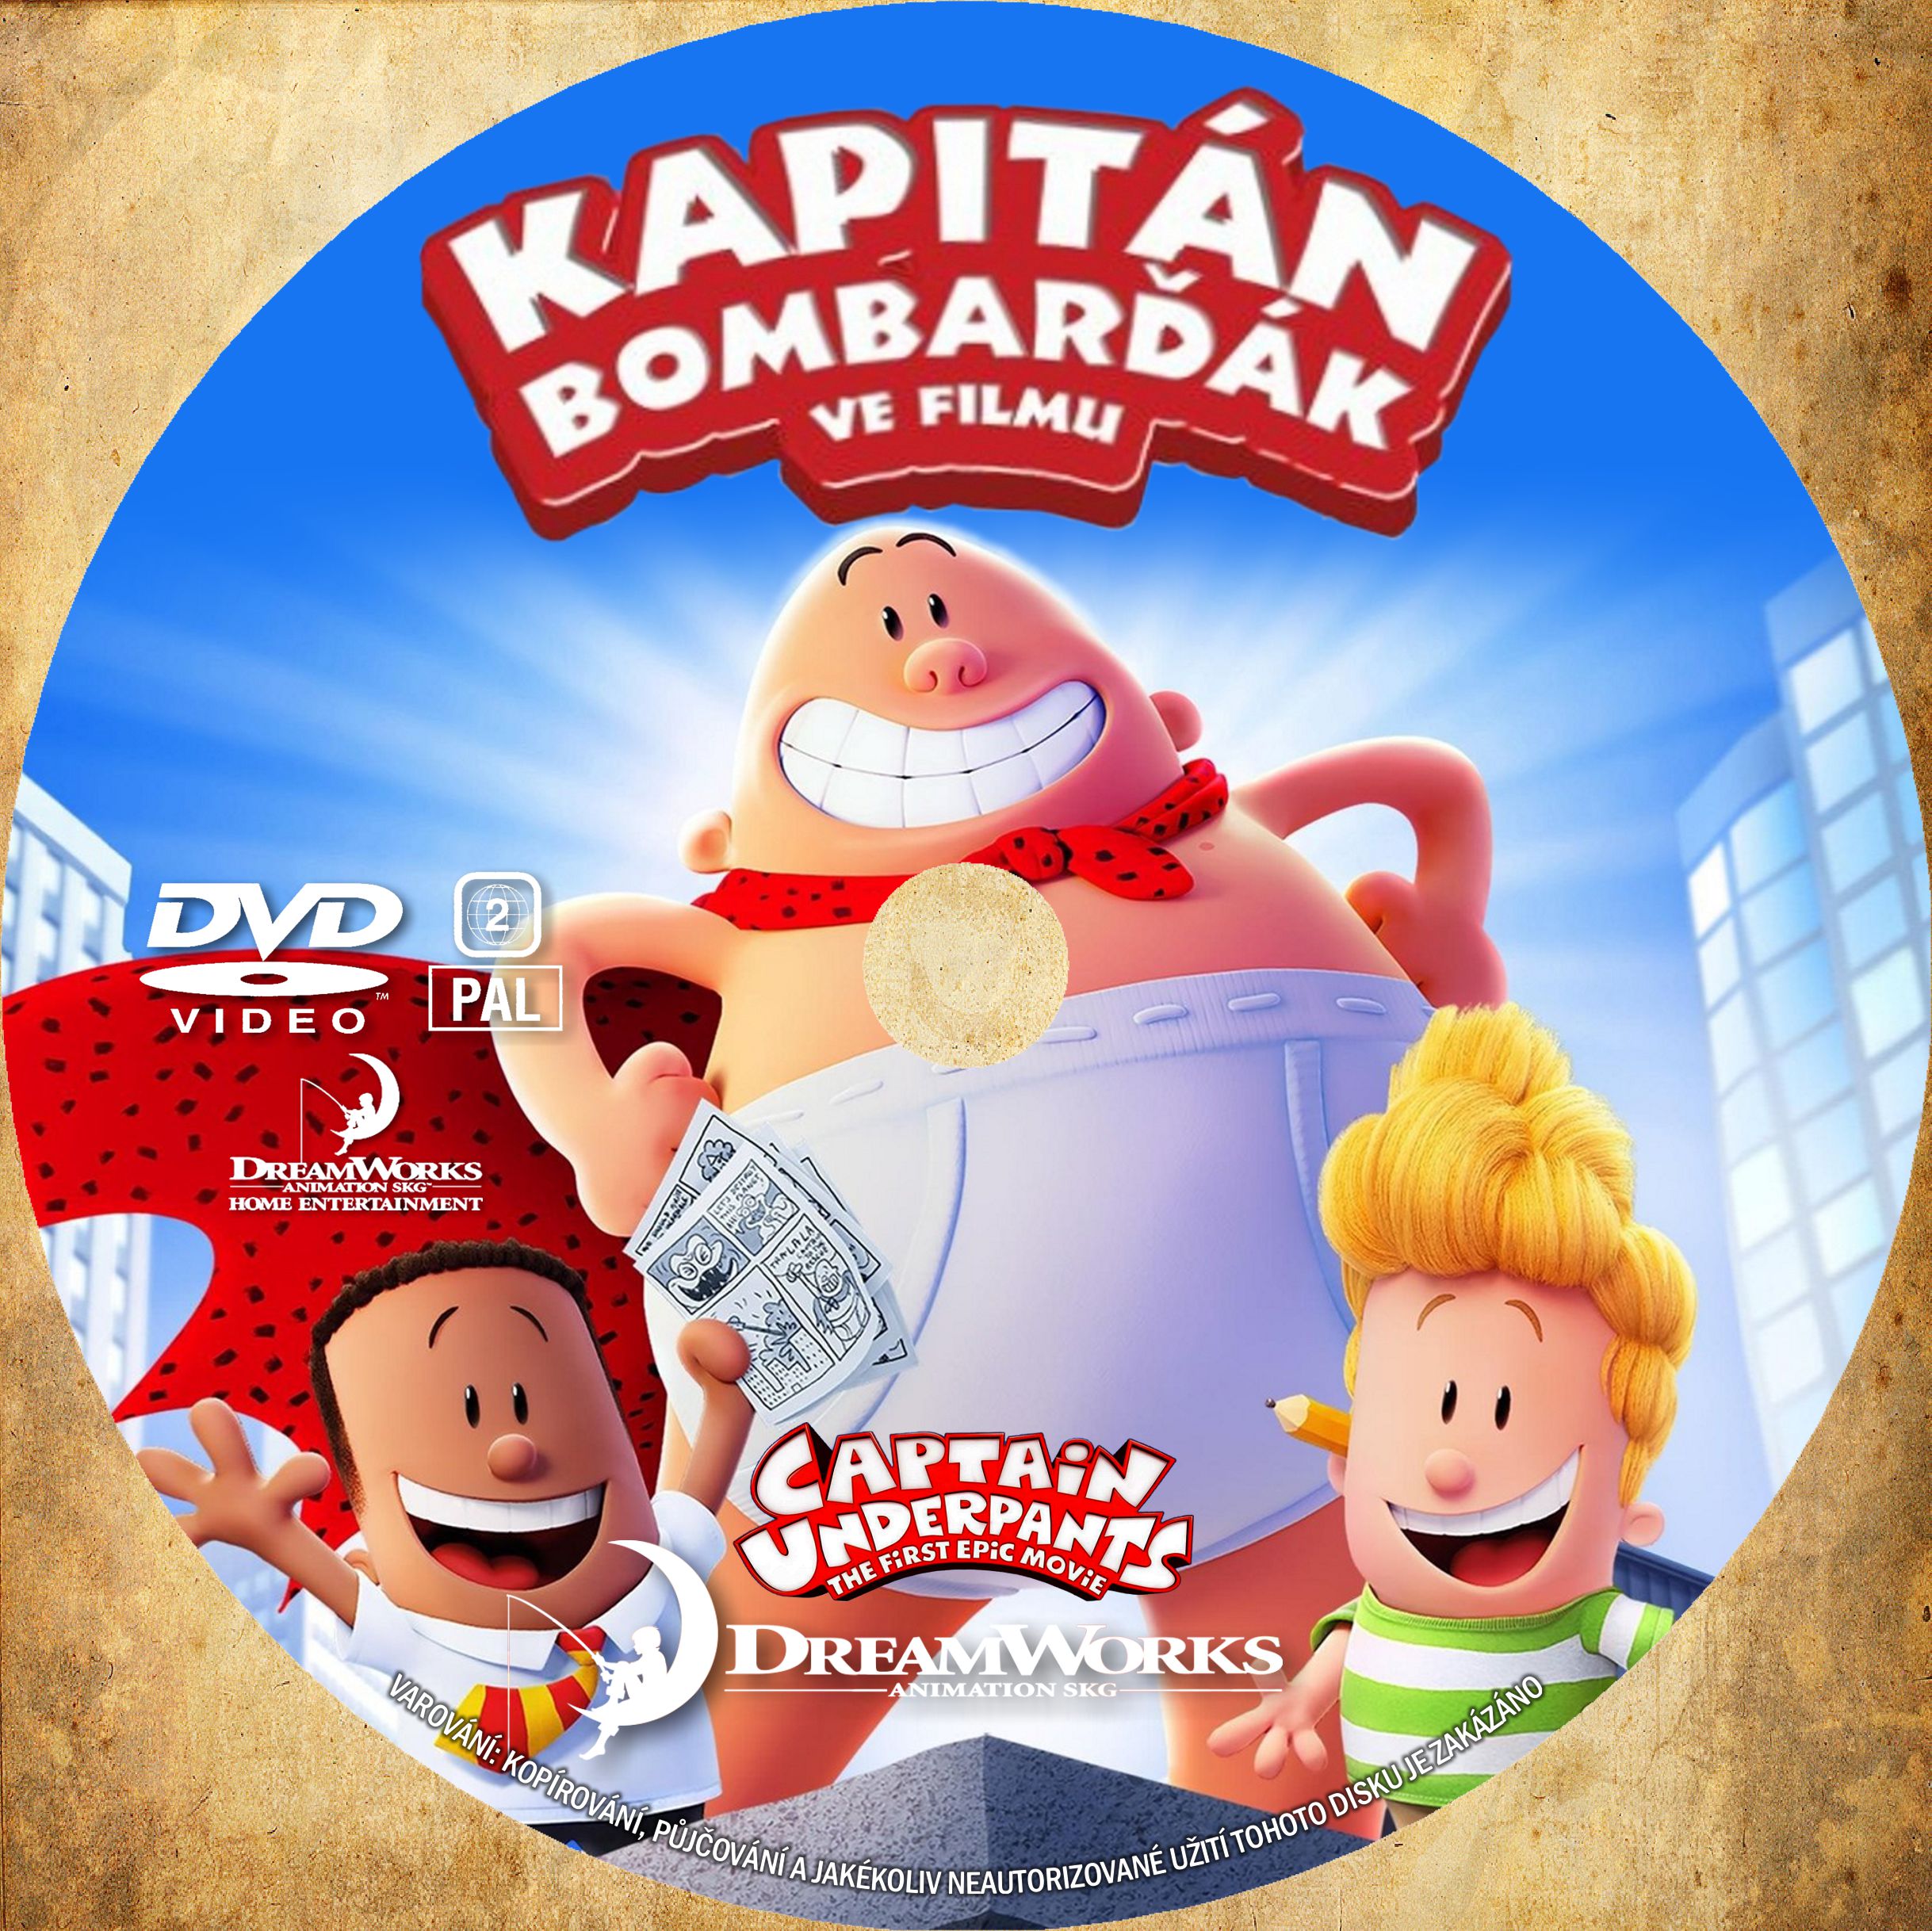 captain underpants movie download in english